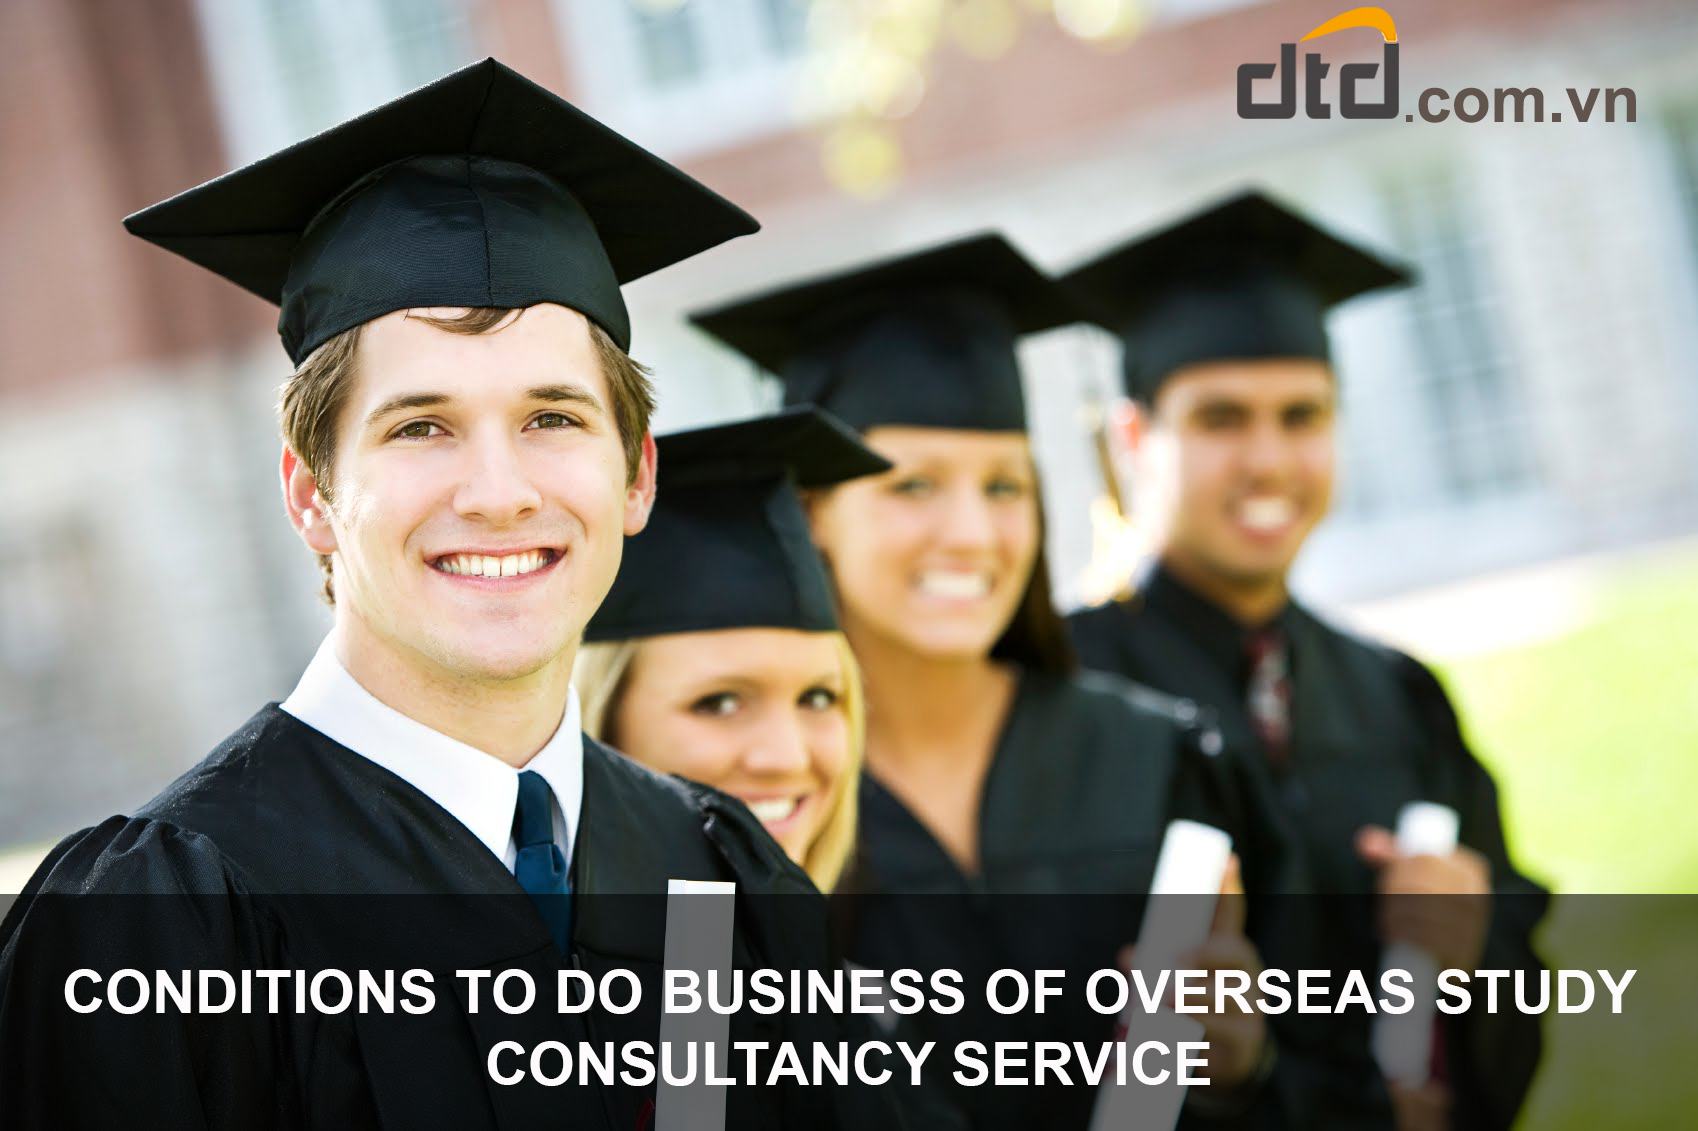 Conditions to do business of overseas study consultancy service and the procedures to grant the certificate of overseas study consultancy service business registration.